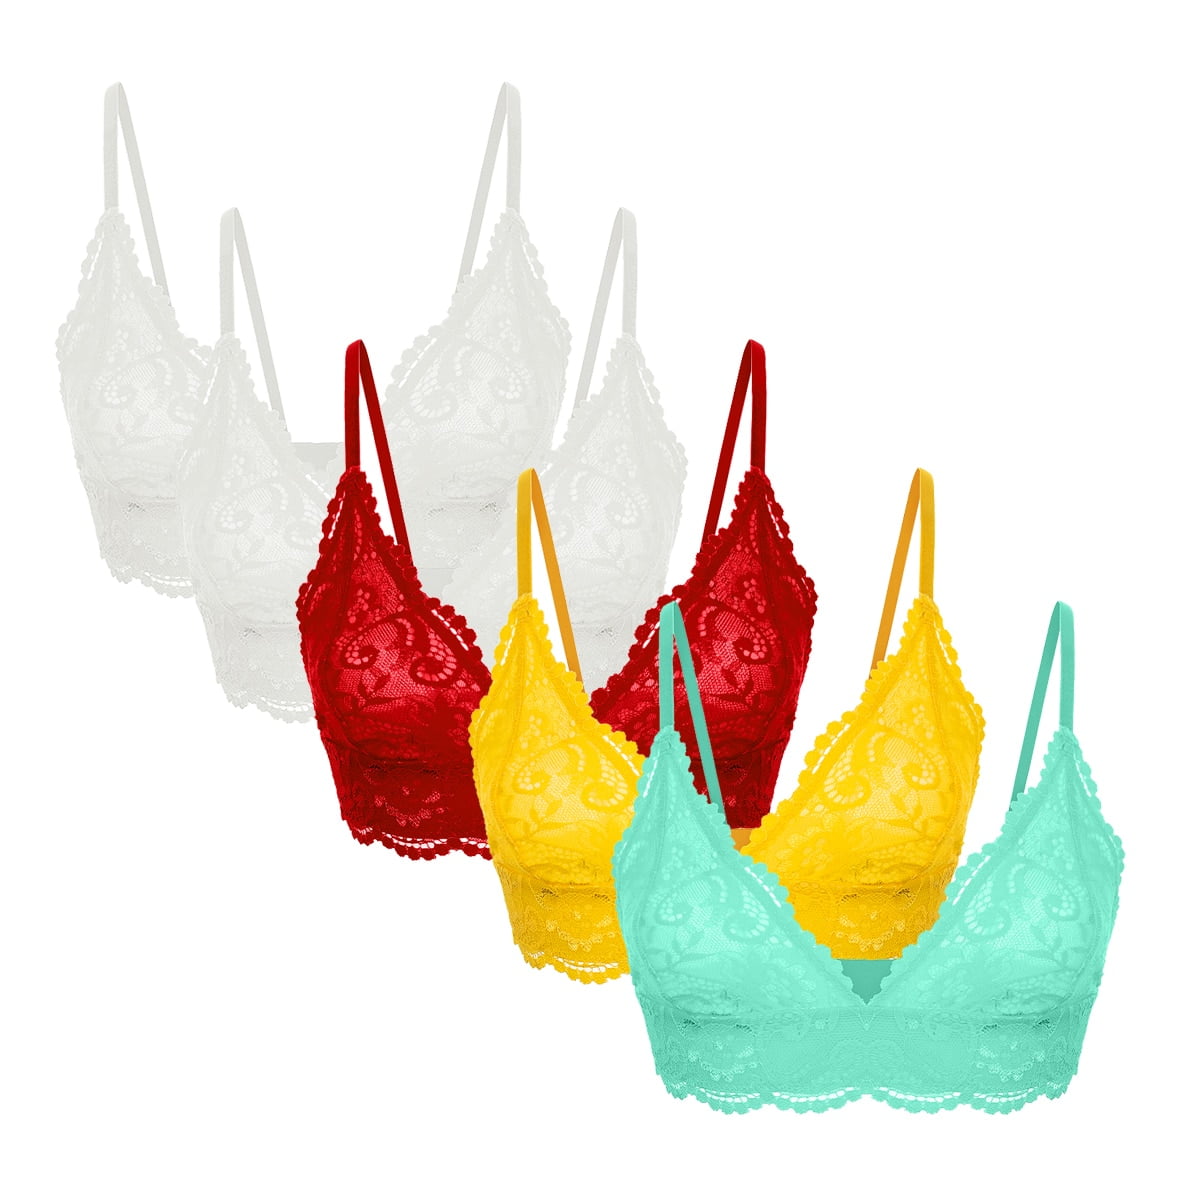 OYOANGLE Women's 5 Piece Set Floral Lace Wireless Bra V Neck Padding  Bralettes Camisole Everyday Bras Multicolor S at  Women's Clothing  store